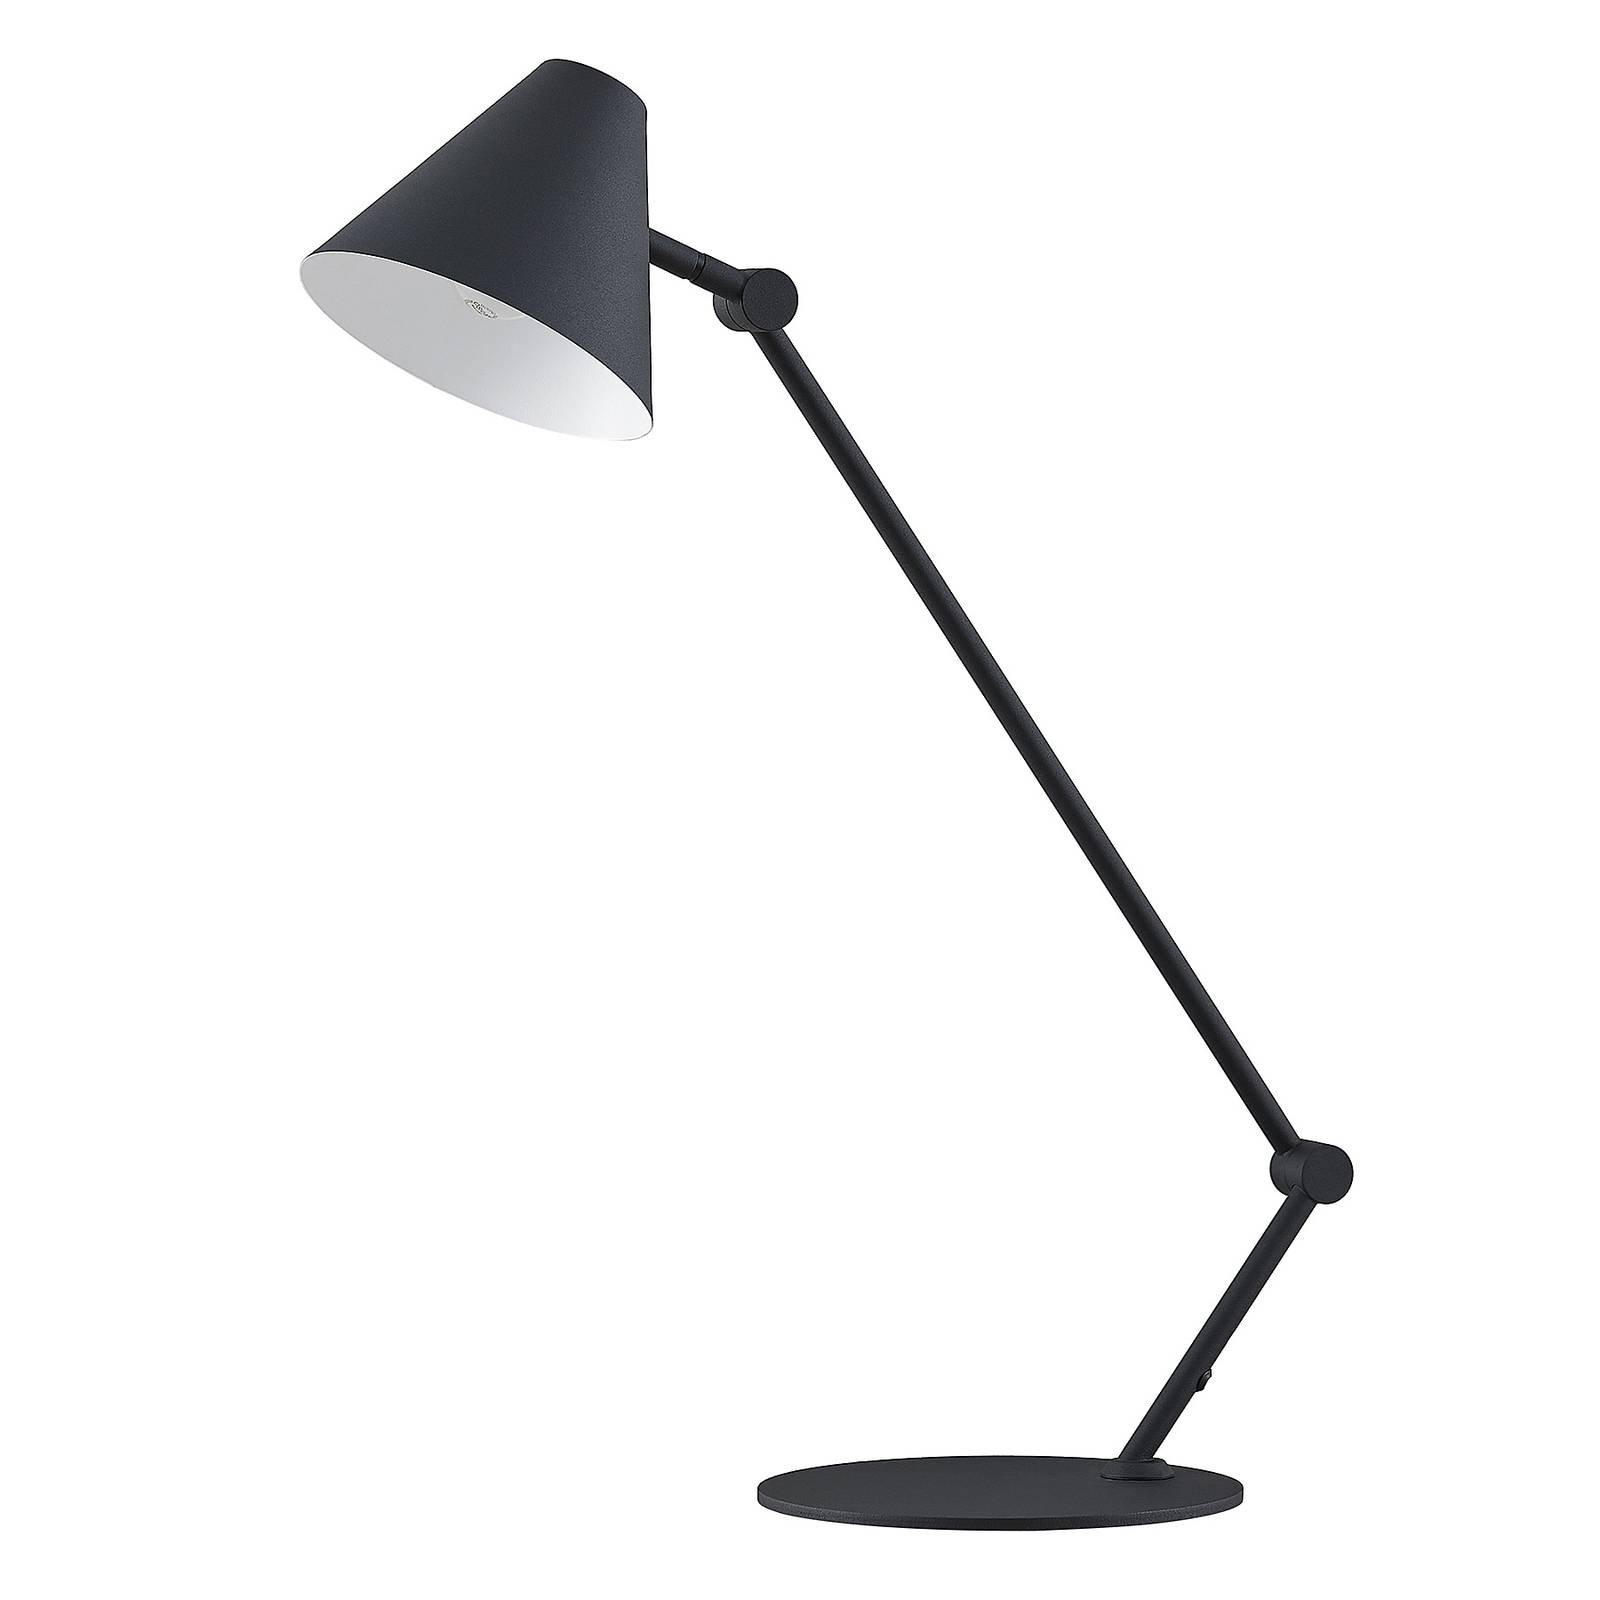 Lucande Phina table lamp, black, height-adjustable